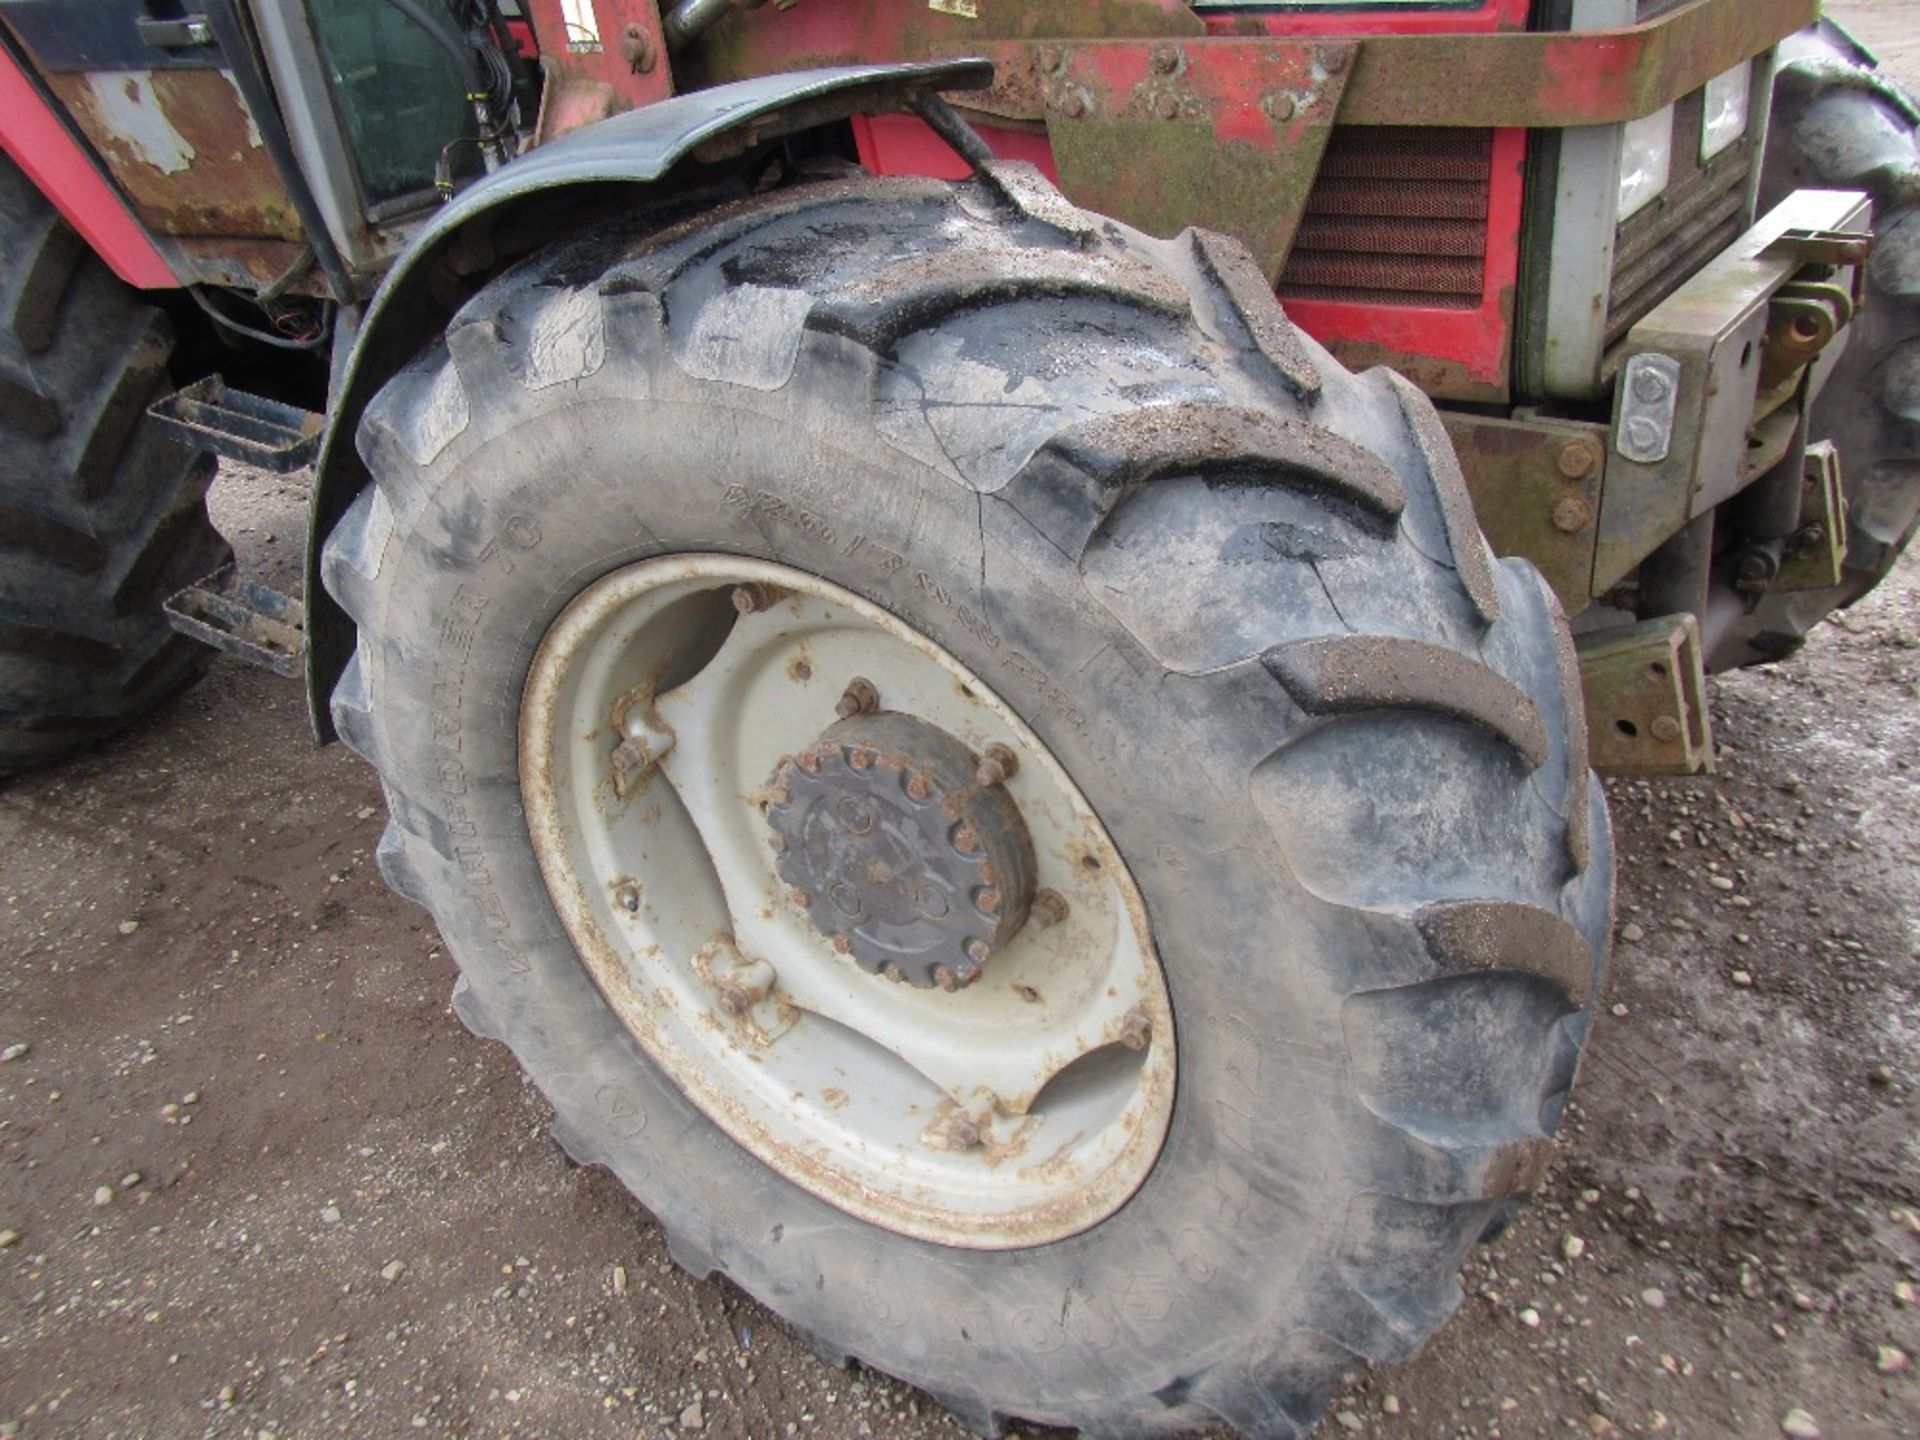 1994 Massey Ferguson 3090 4wd Tractor with Front Loader. Reg. No. M317 OCW Ser No C201010 - Image 5 of 18